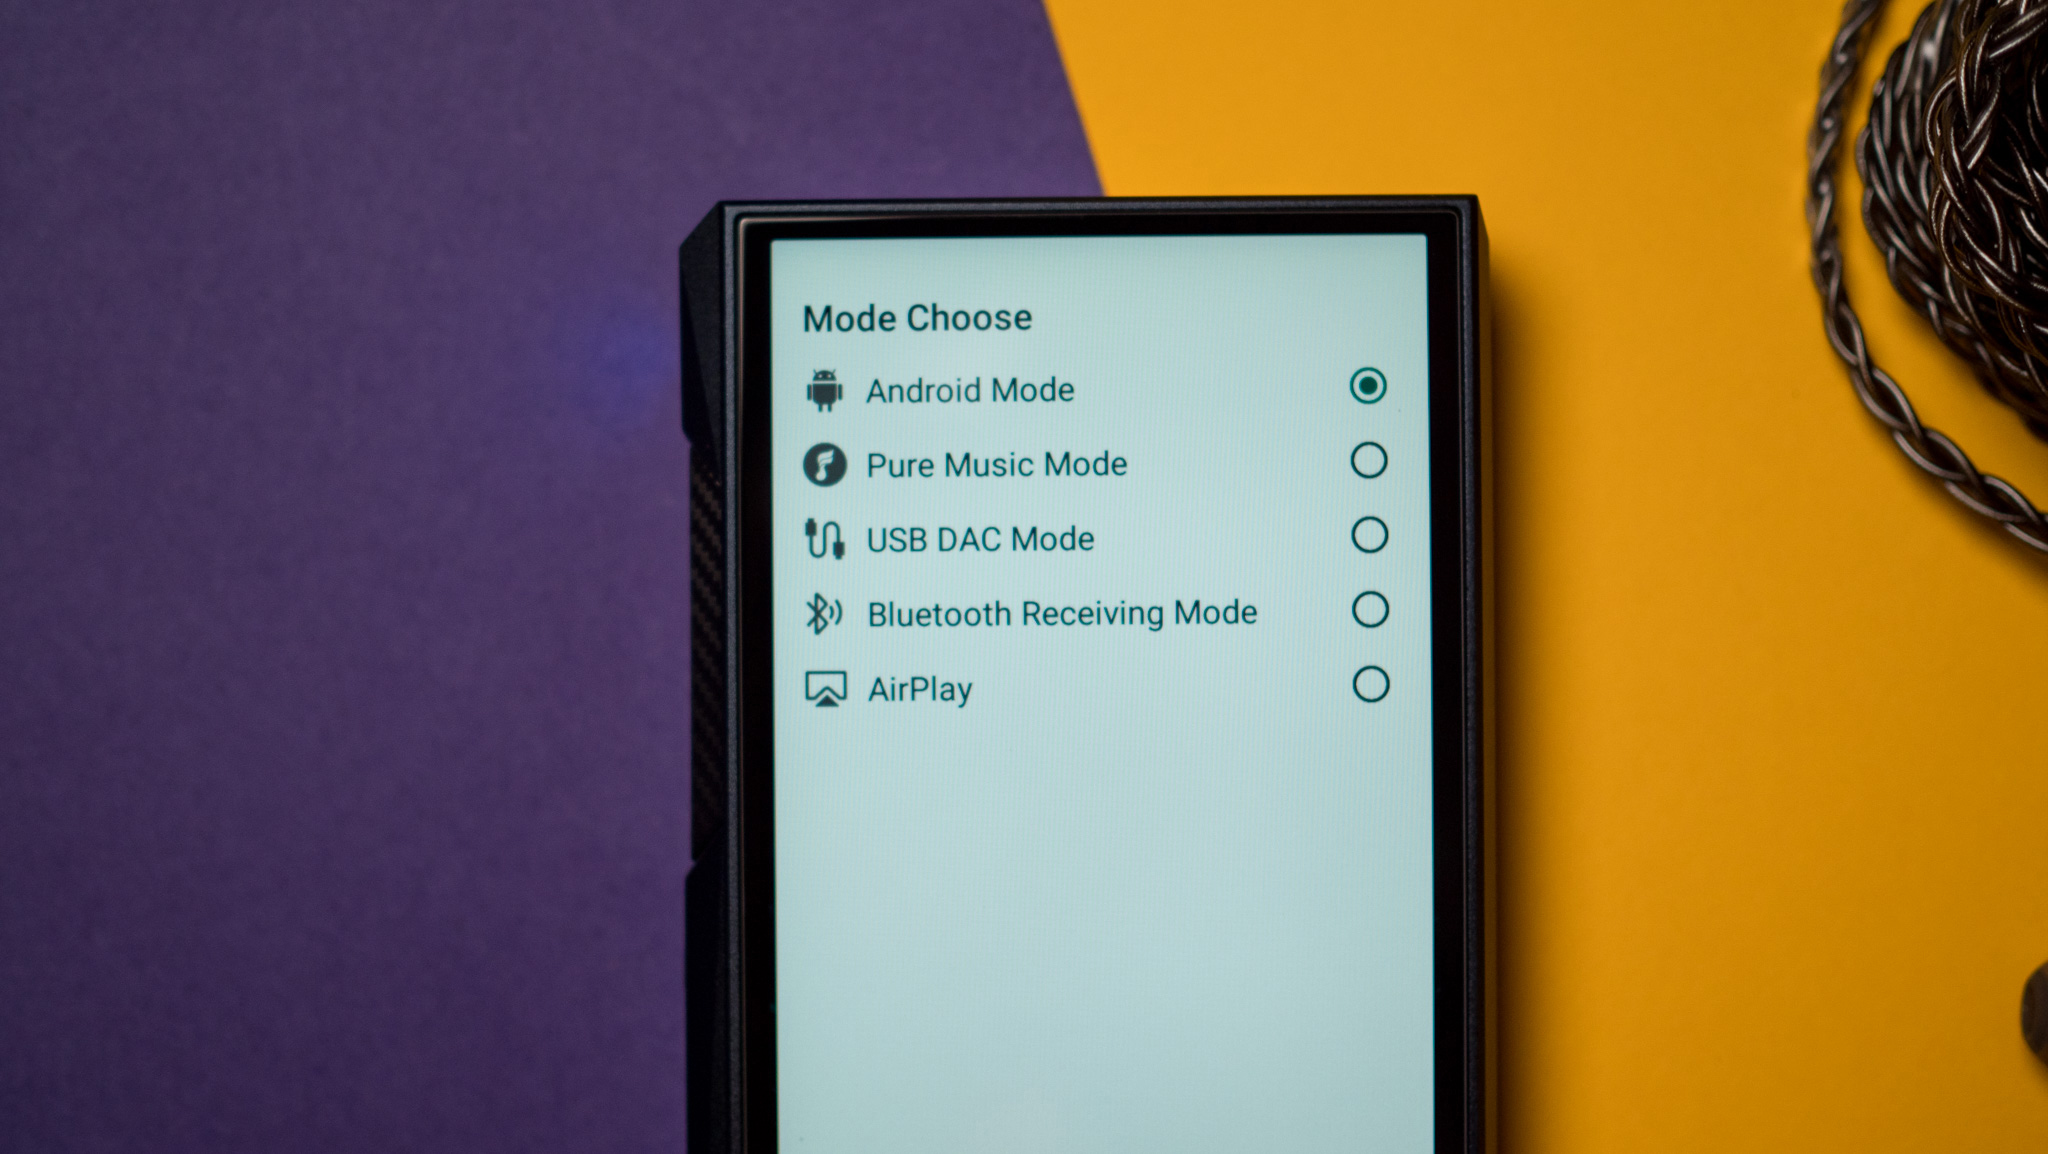 All the usage modes available with the Fiio M23